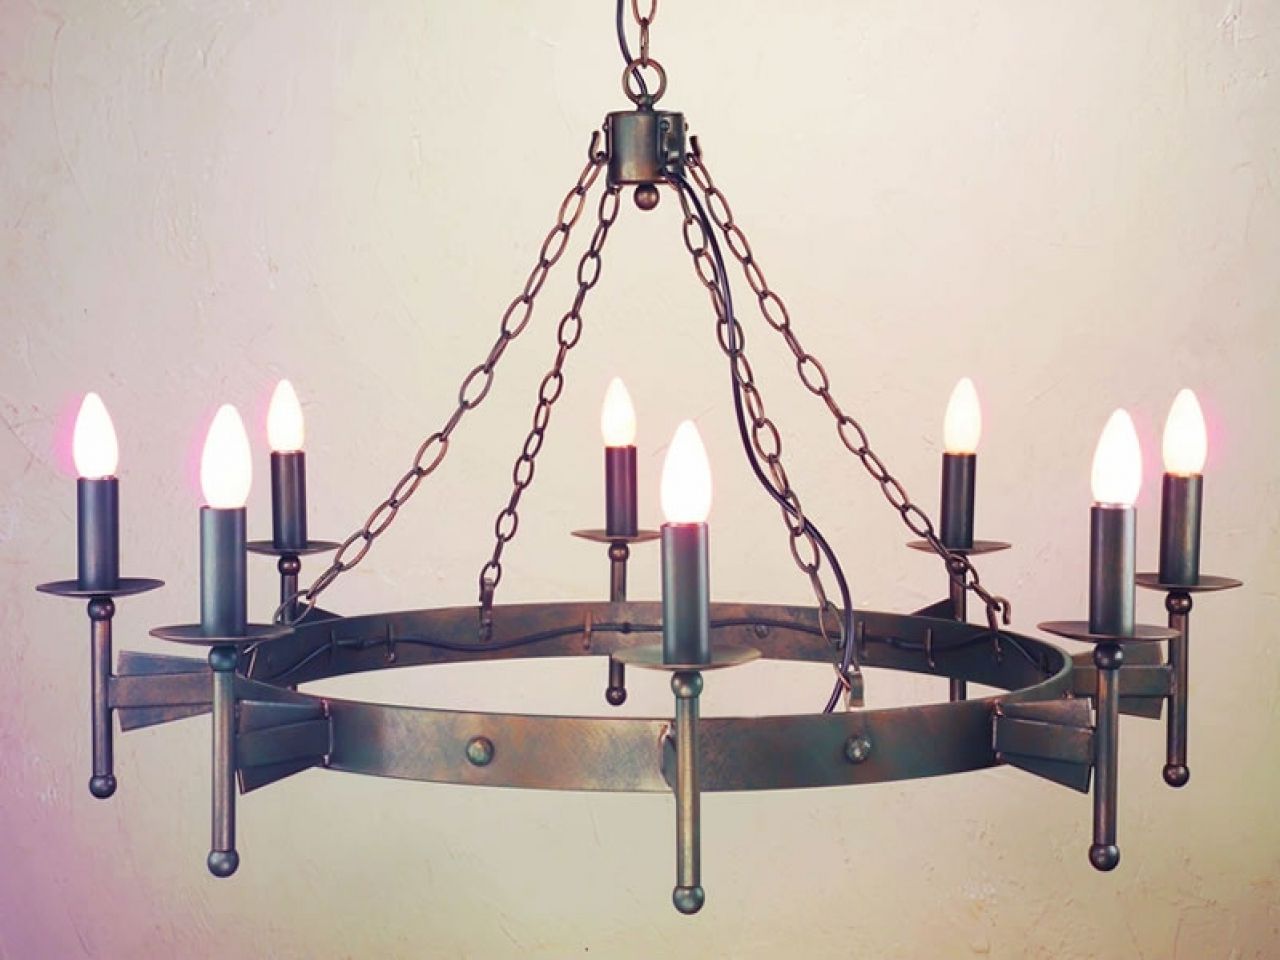 Large Iron Chandeliers For Most Up To Date Chandeliers Design : Marvelous Top Rustic Iron Chandelier For (View 19 of 20)